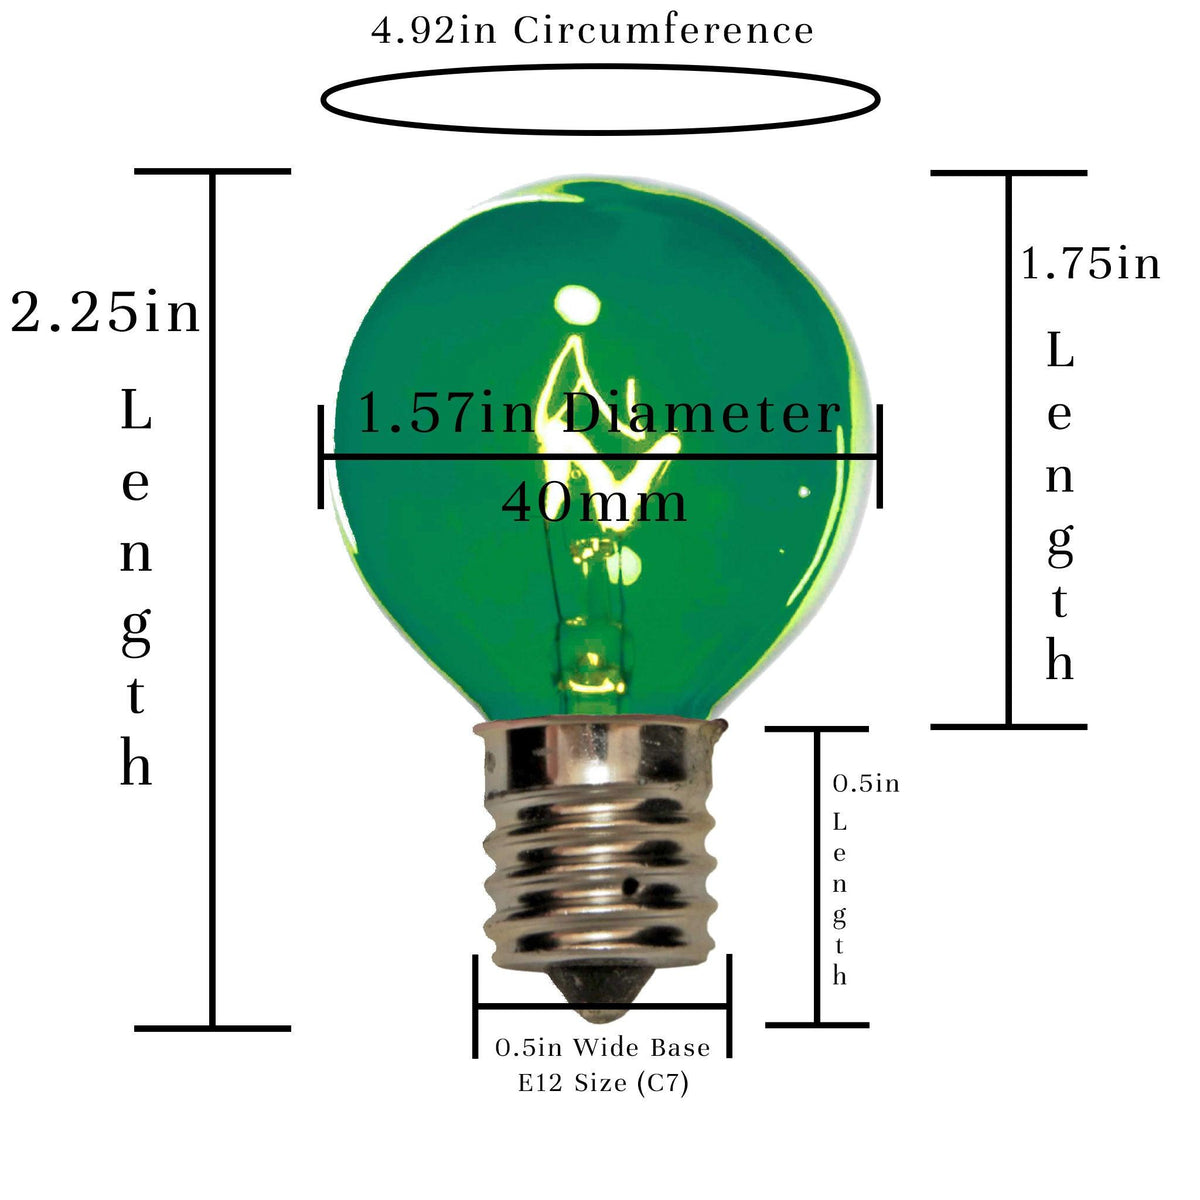 Size and Dimensions of a G40 Light Bulb.  Available for sale at leedisplay.com